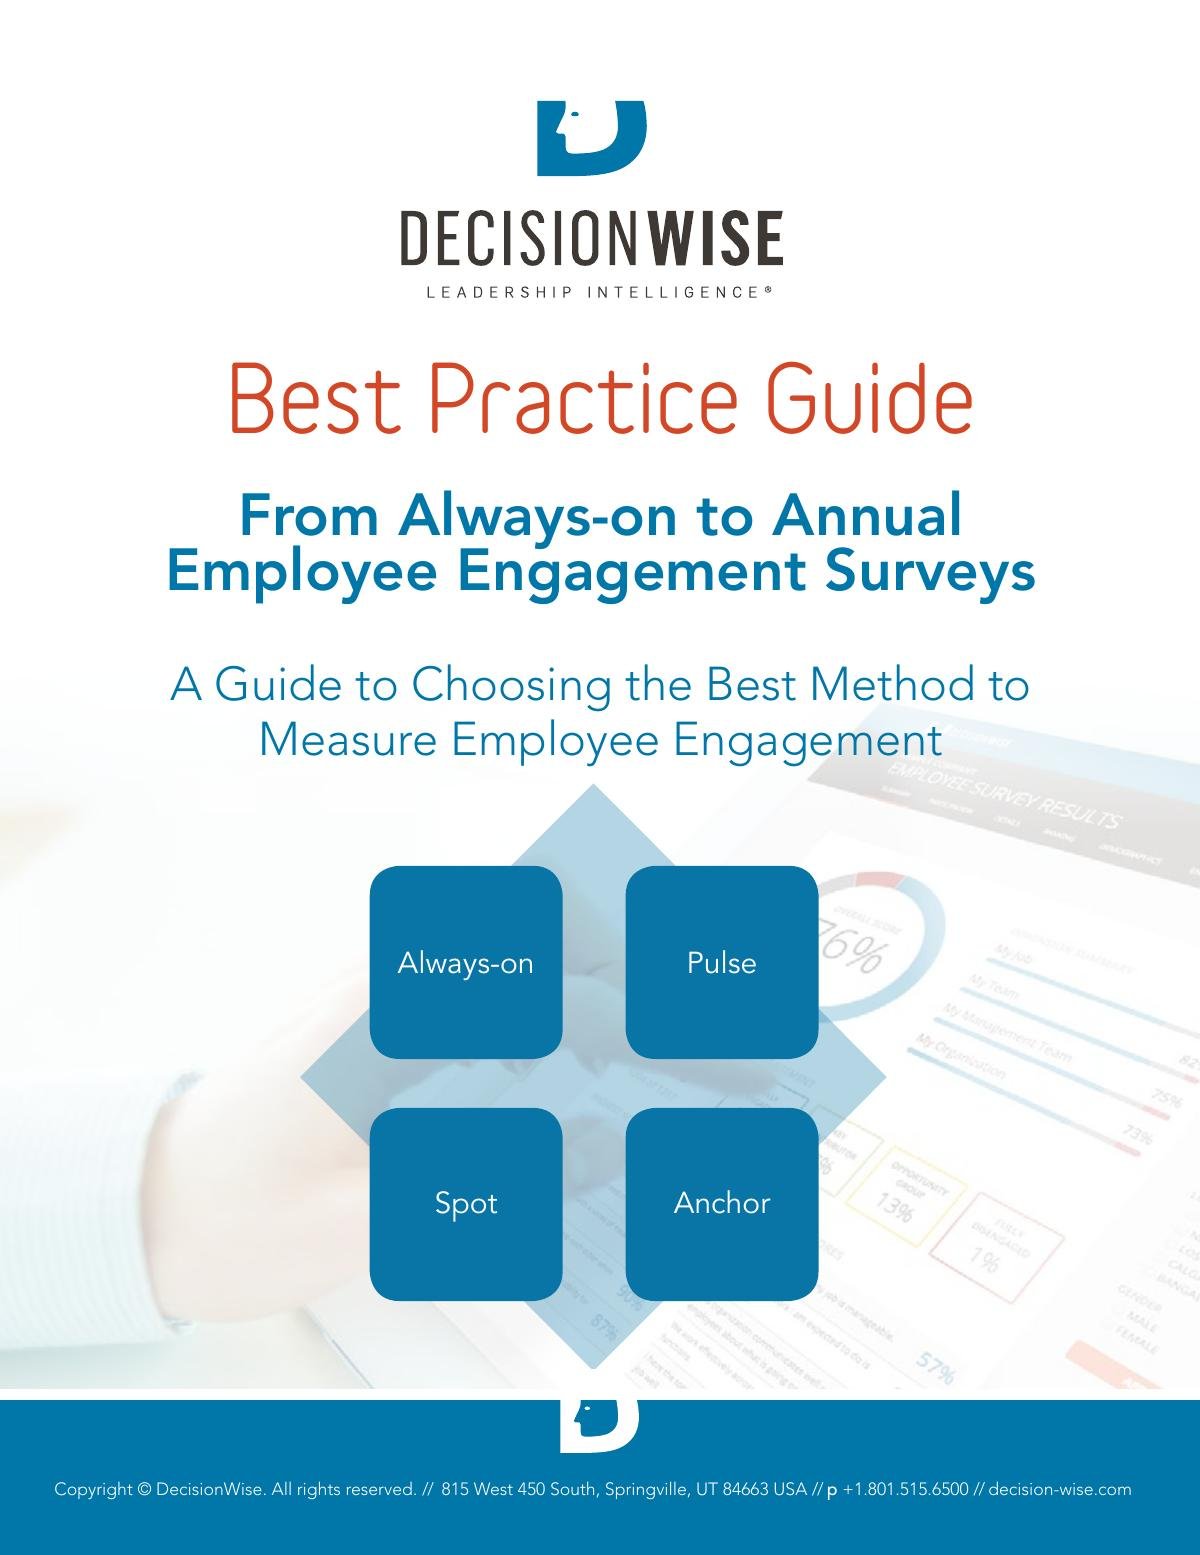 Best Practice Guide to Measuring Employee Engagement